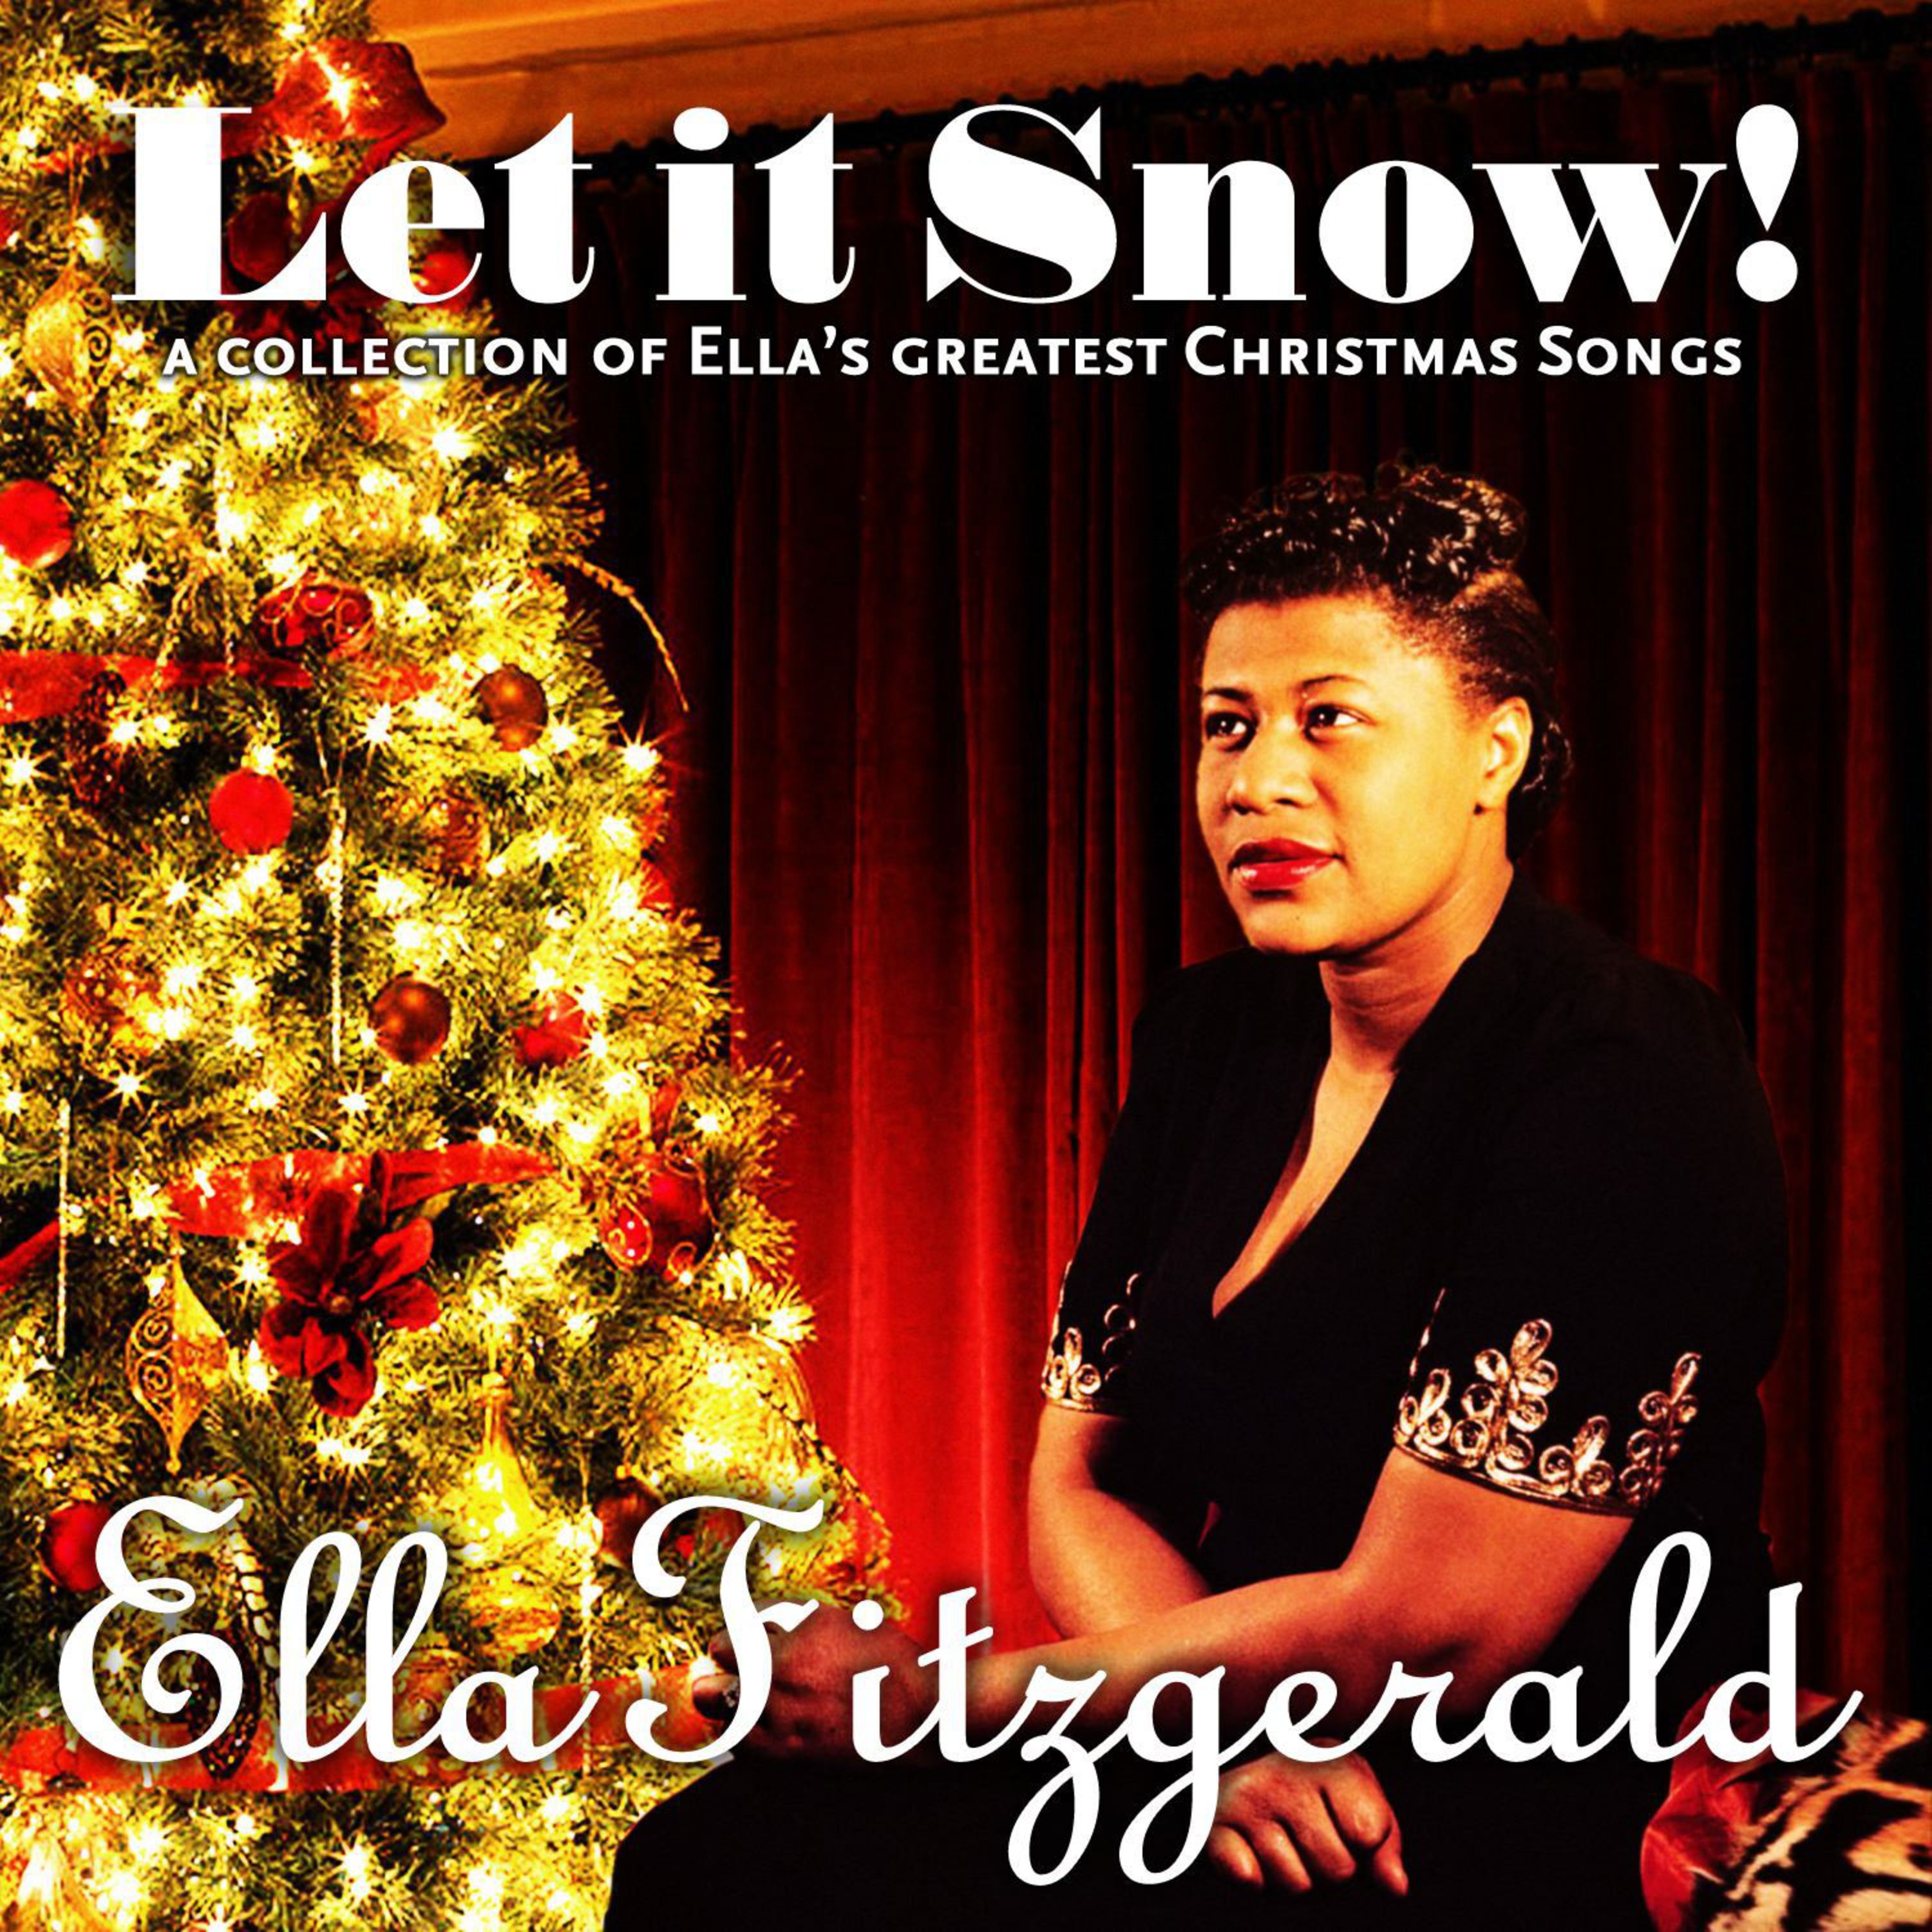 Let it Snow! (A Collection of Ella's Greatest Christmas Songs)